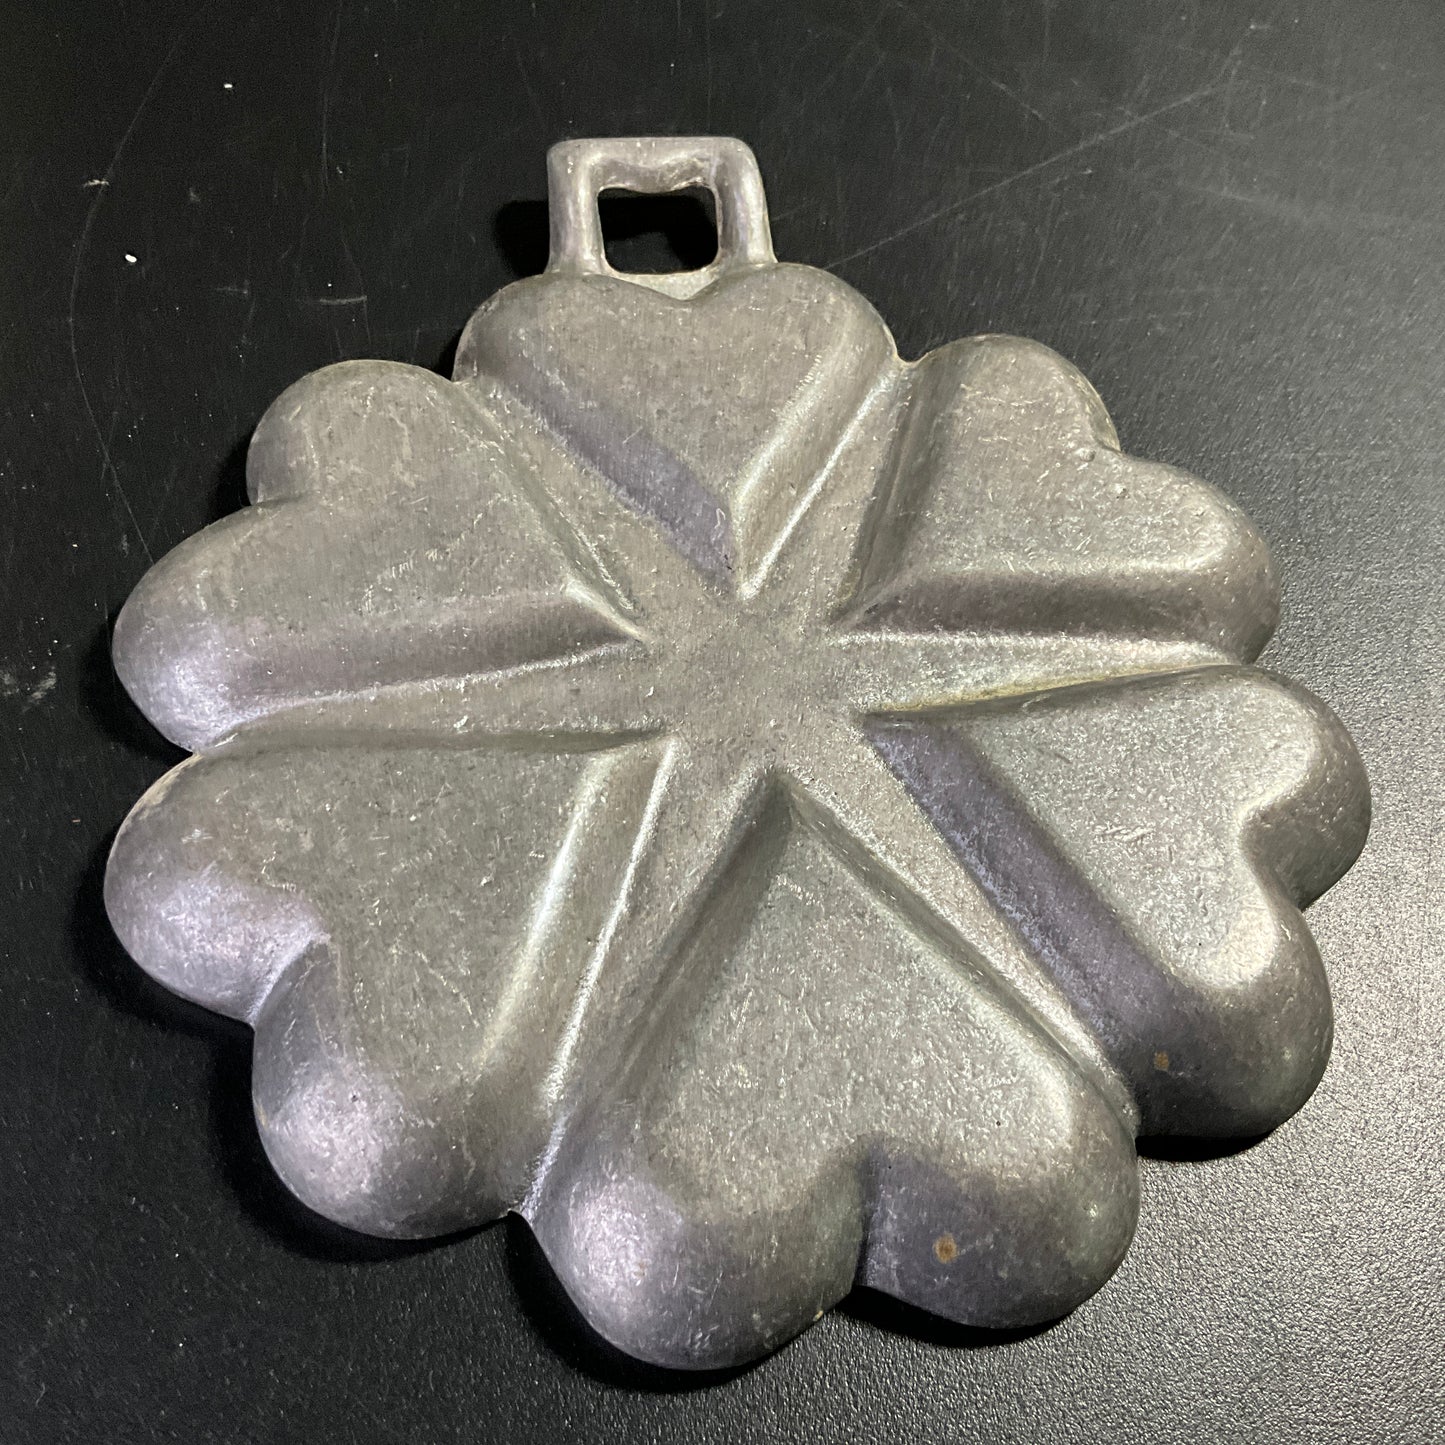 Hearts & Stars cast aluminum mold / wall hanging kitchen collectible